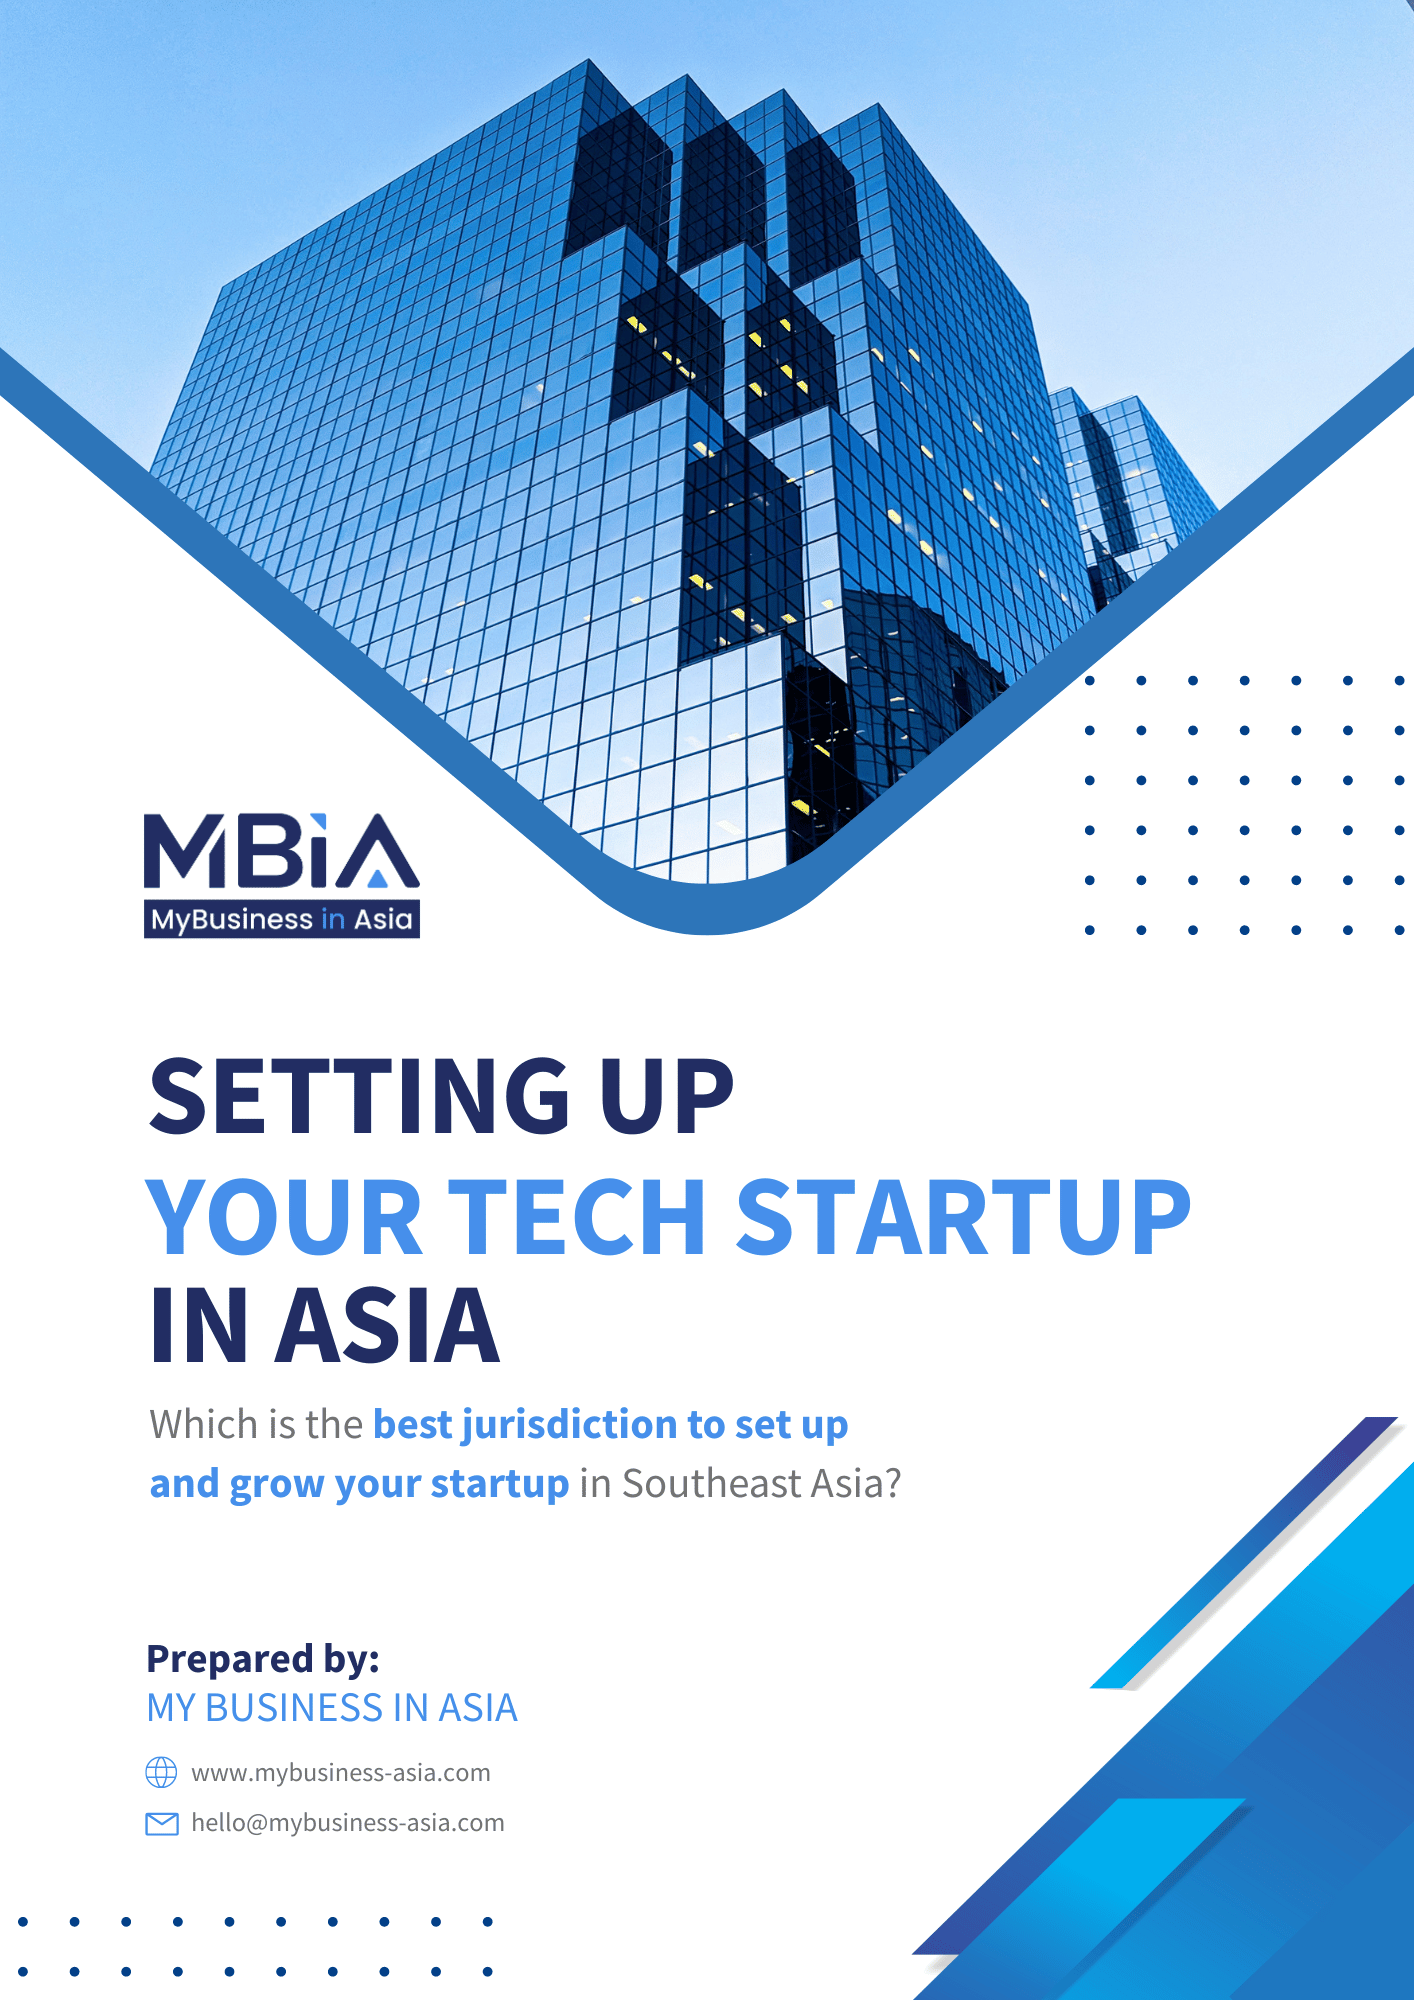 The first page of the Guide on Setting Up Your Tech Startup in Asia